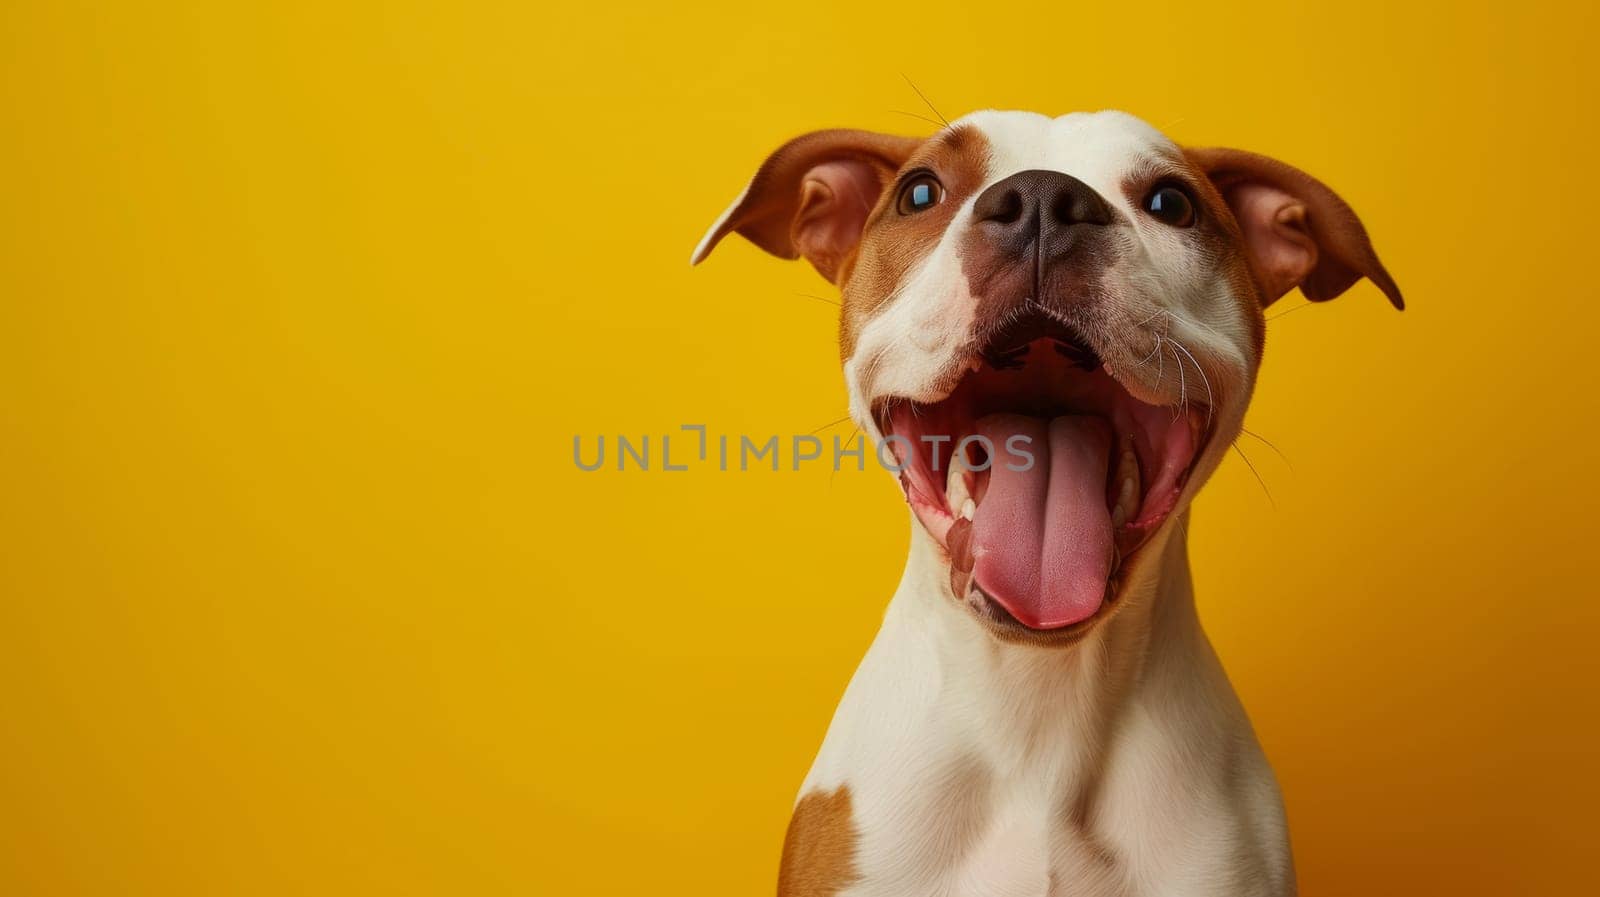 A dog with its mouth open and tongue out on a yellow background